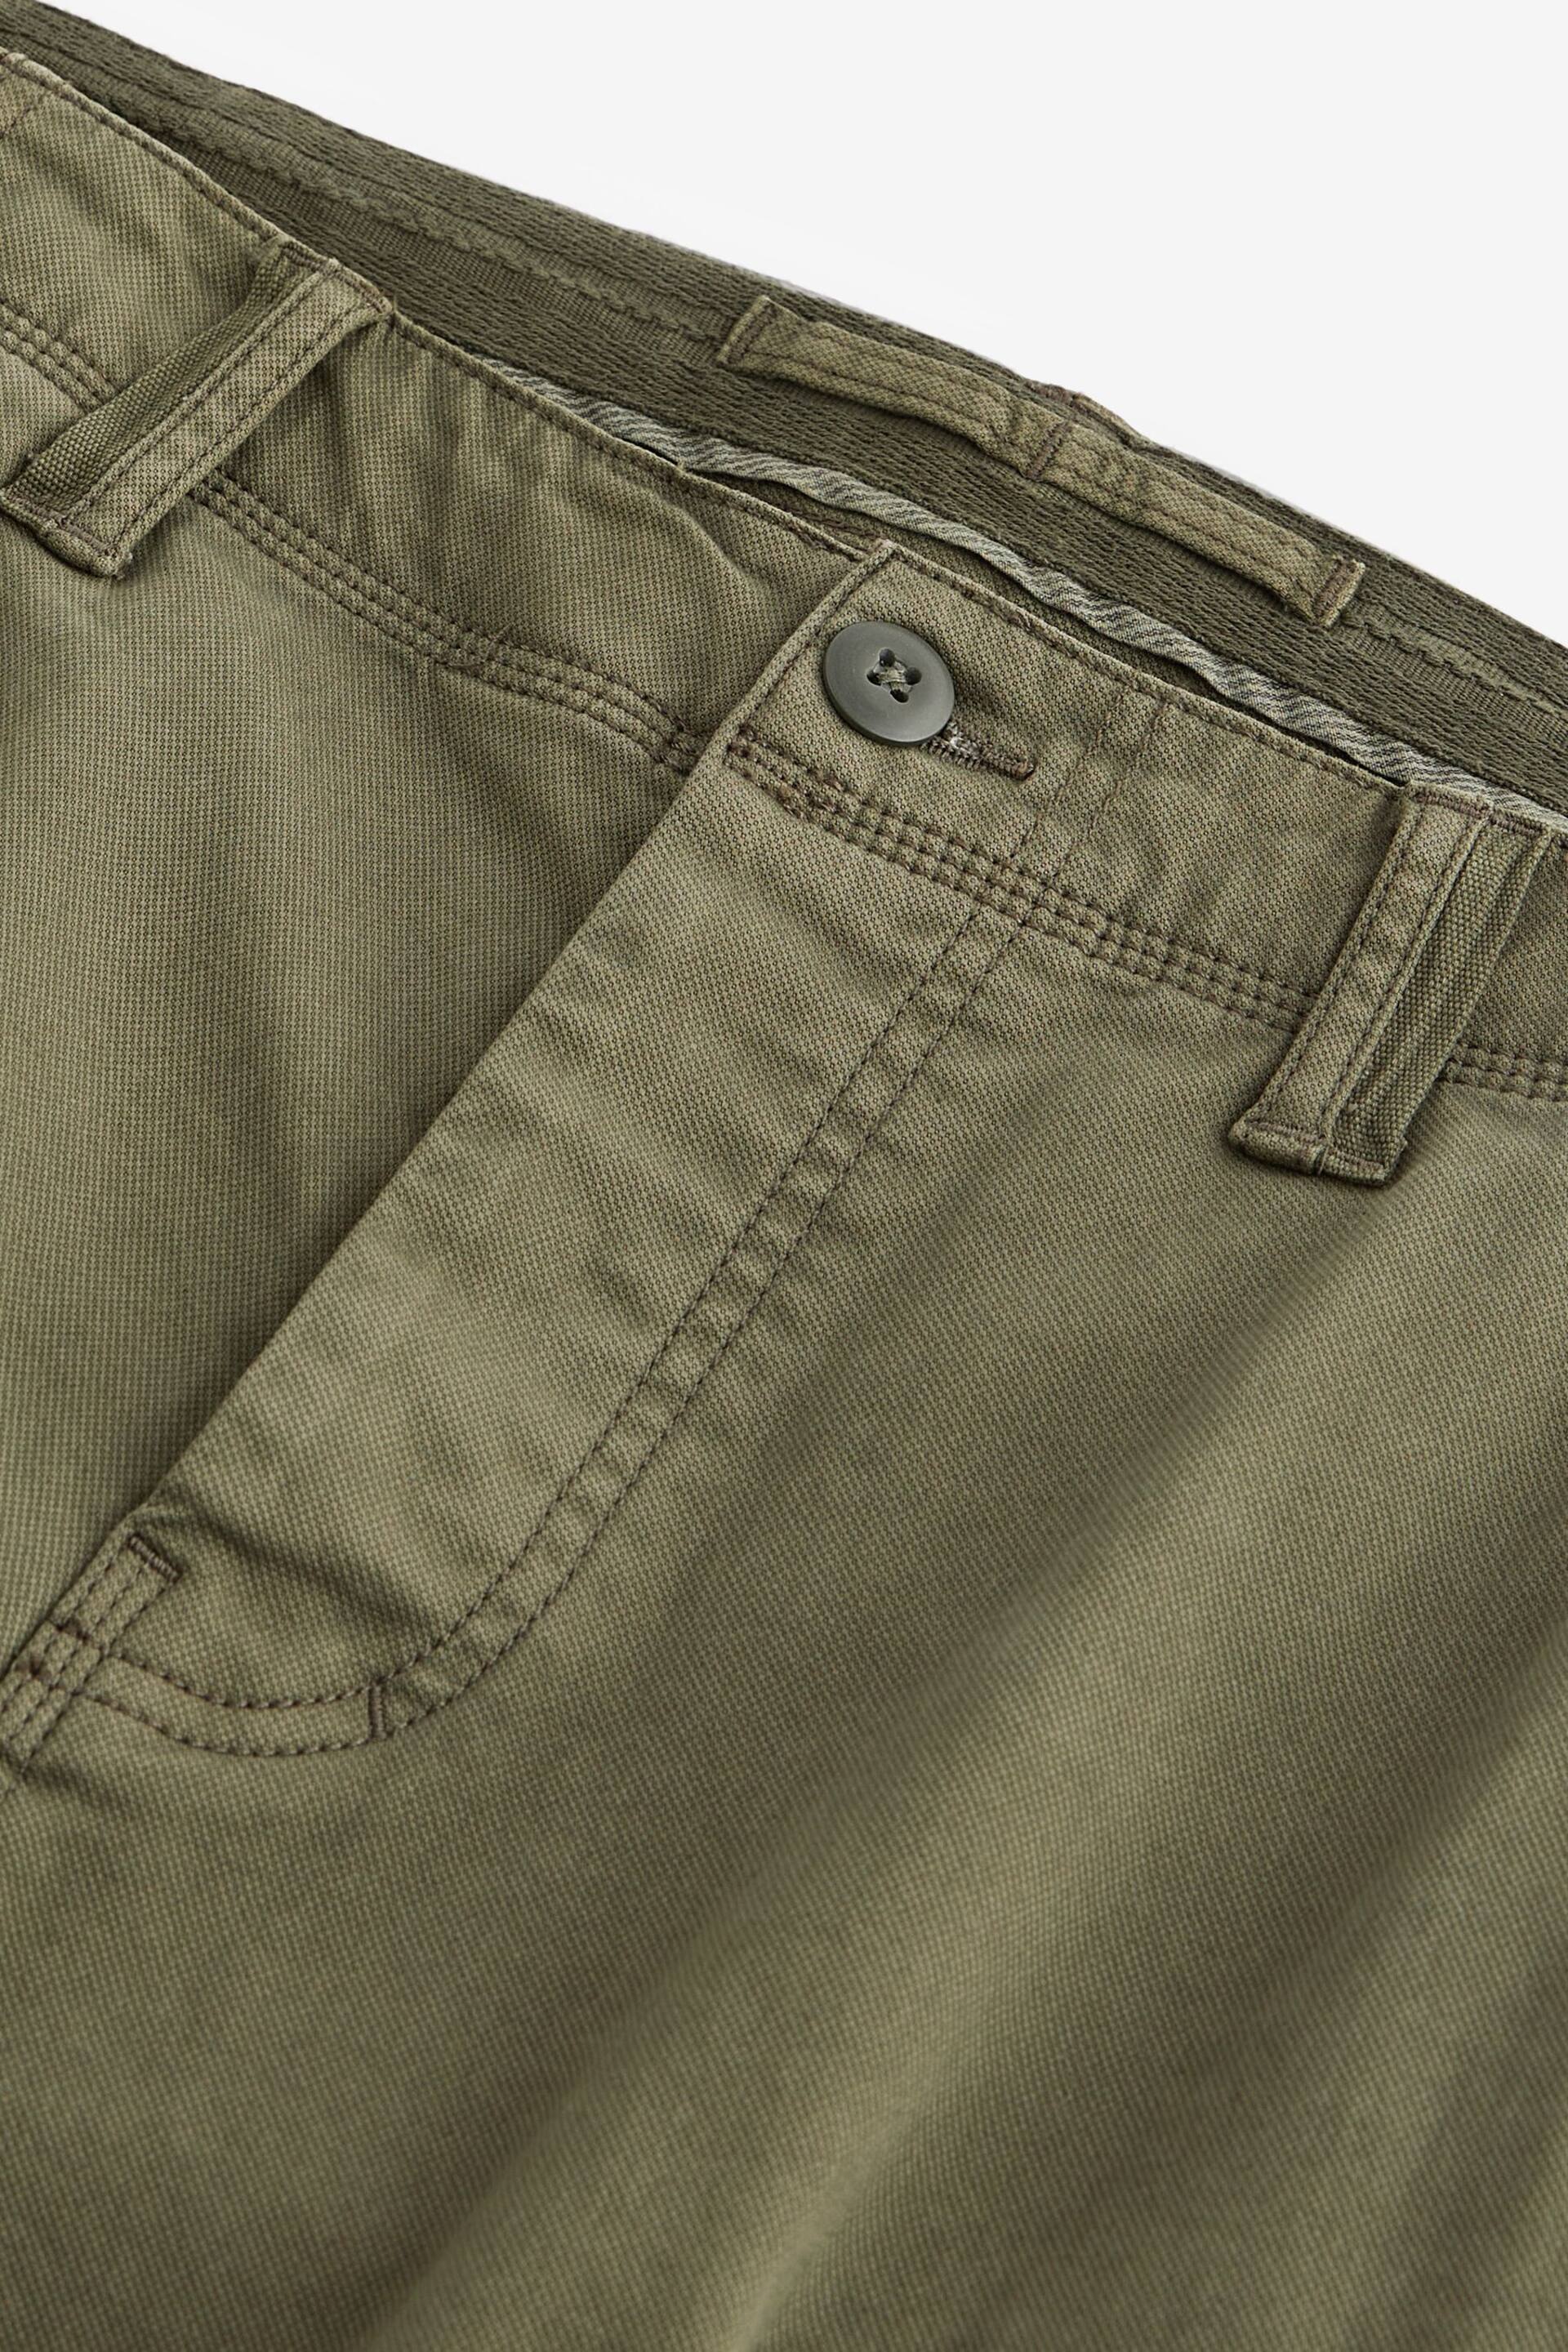 Khaki Green Straight Authentic Stretch Cotton Blend Cargo Trousers - Image 9 of 10